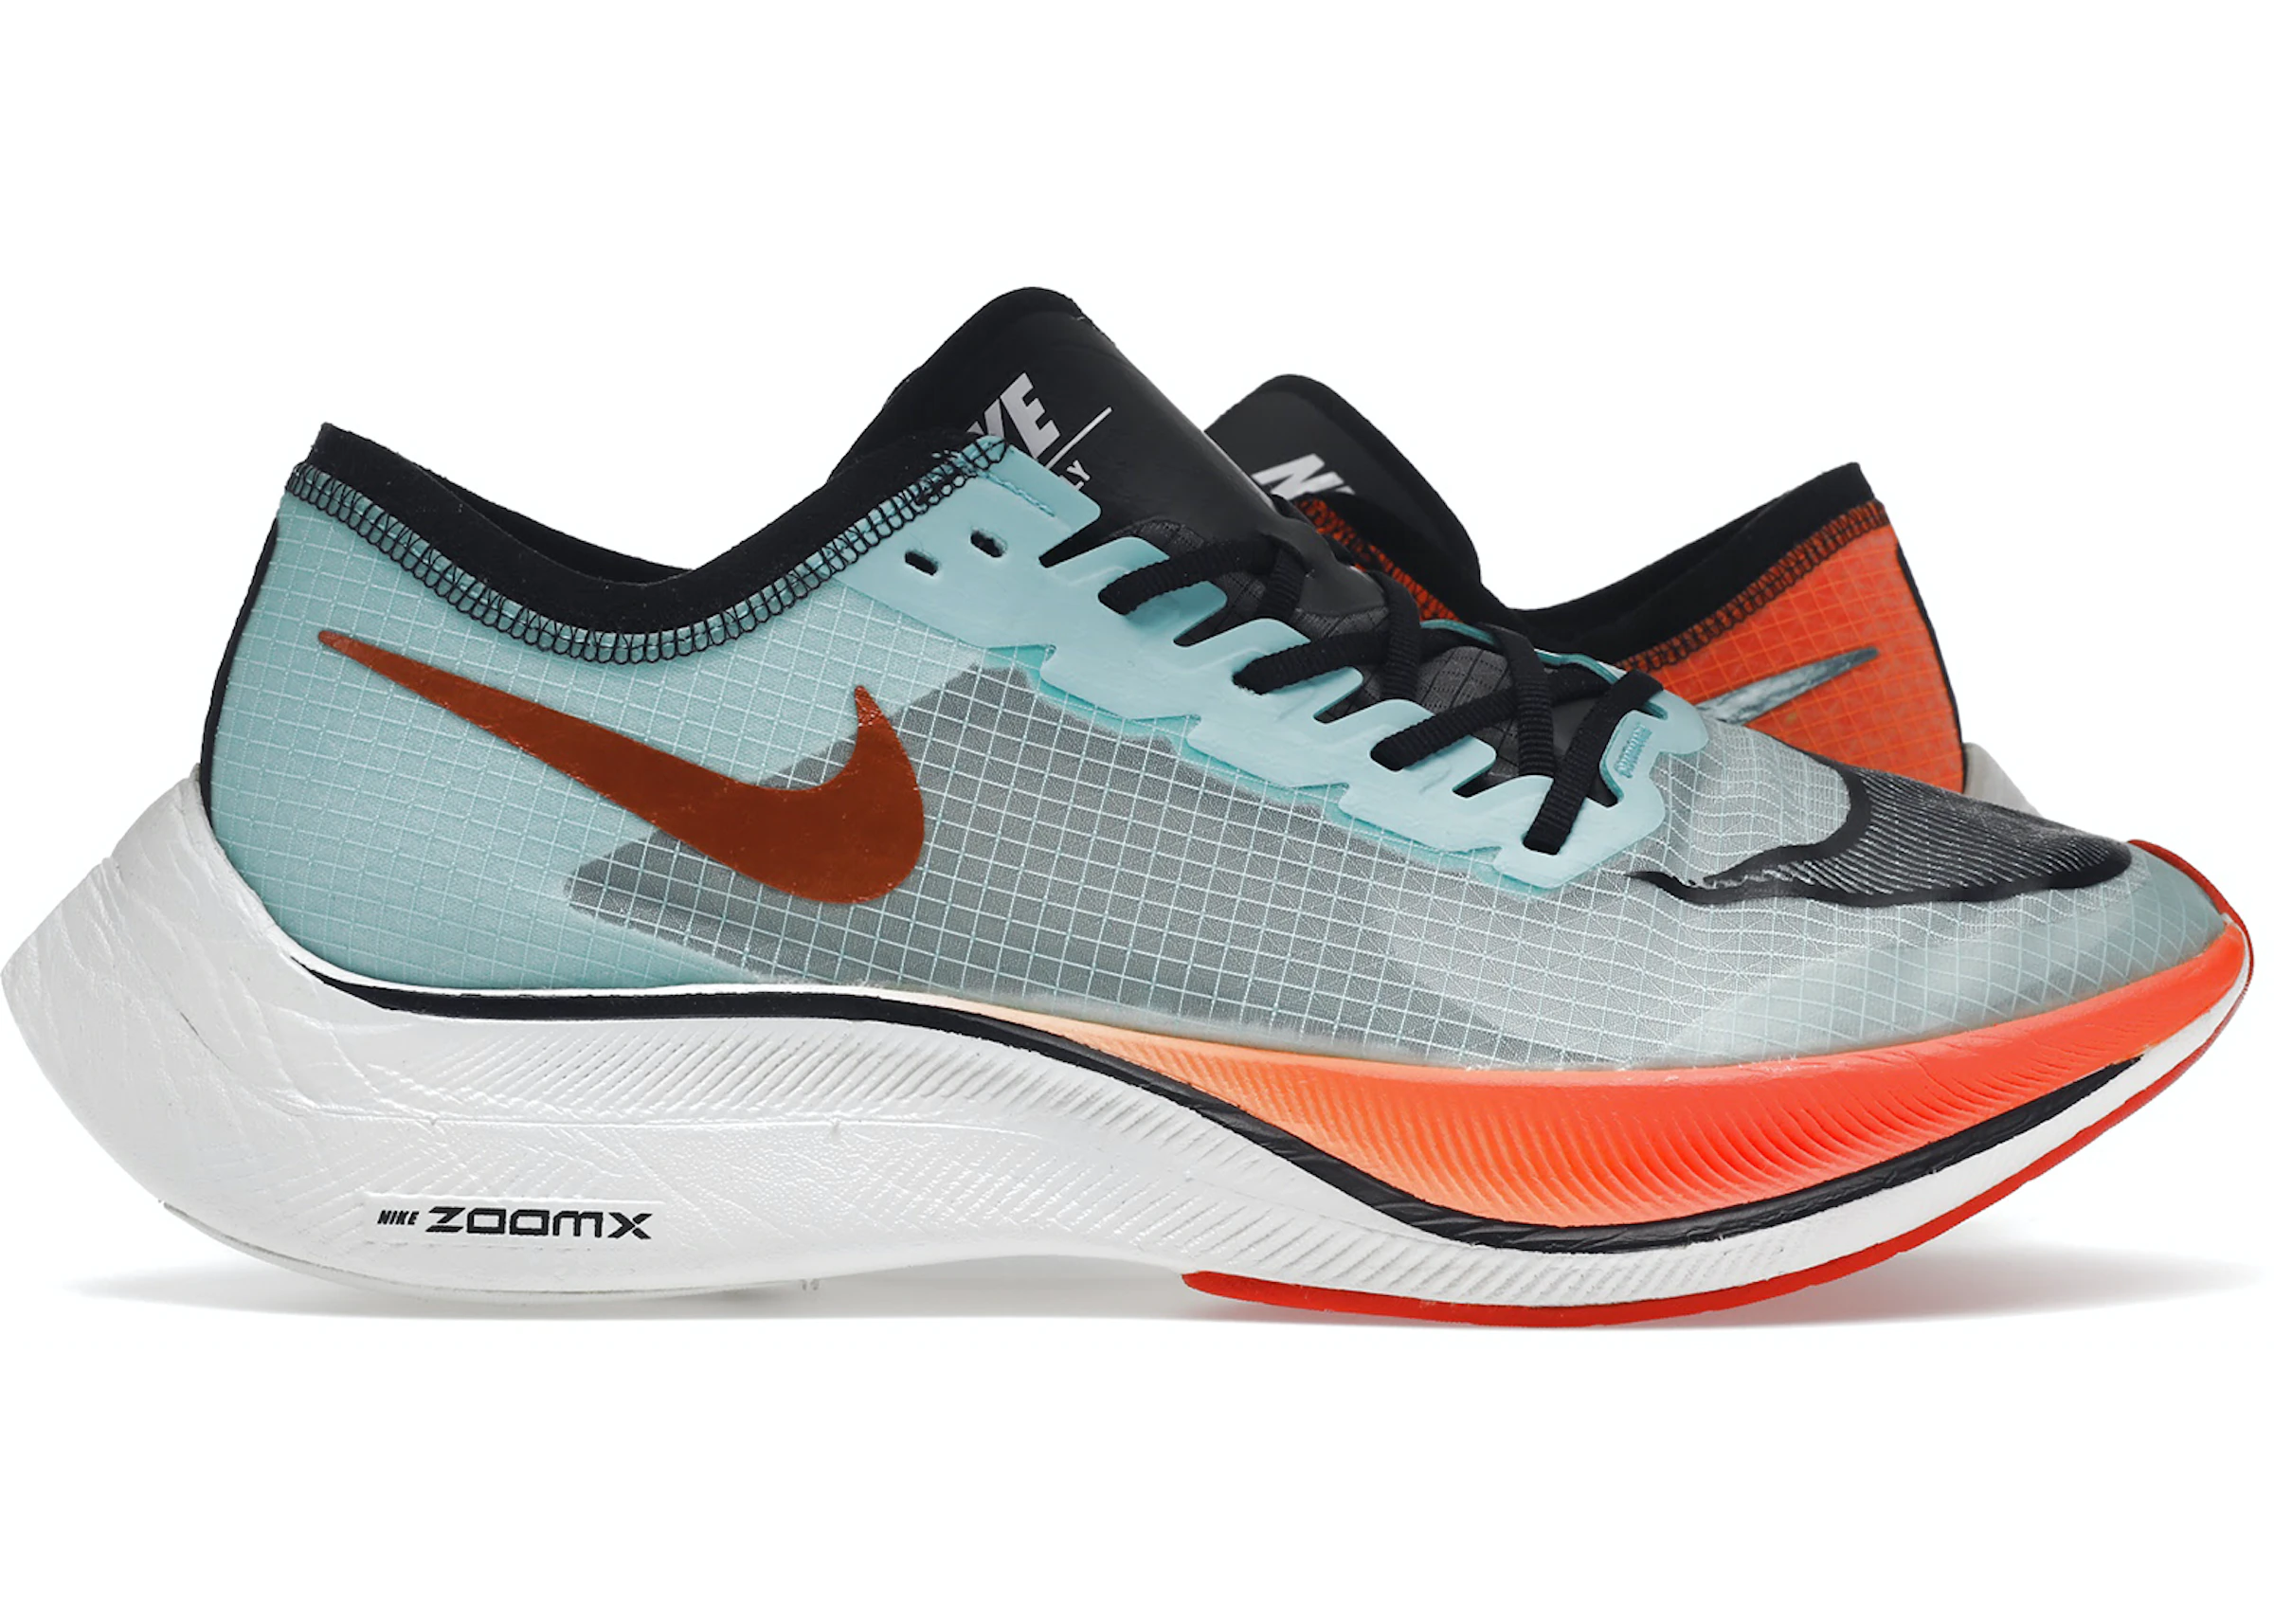 Planned welfare only Nike ZoomX Vaporfly Next% Ekiden - CD4553-300 - US